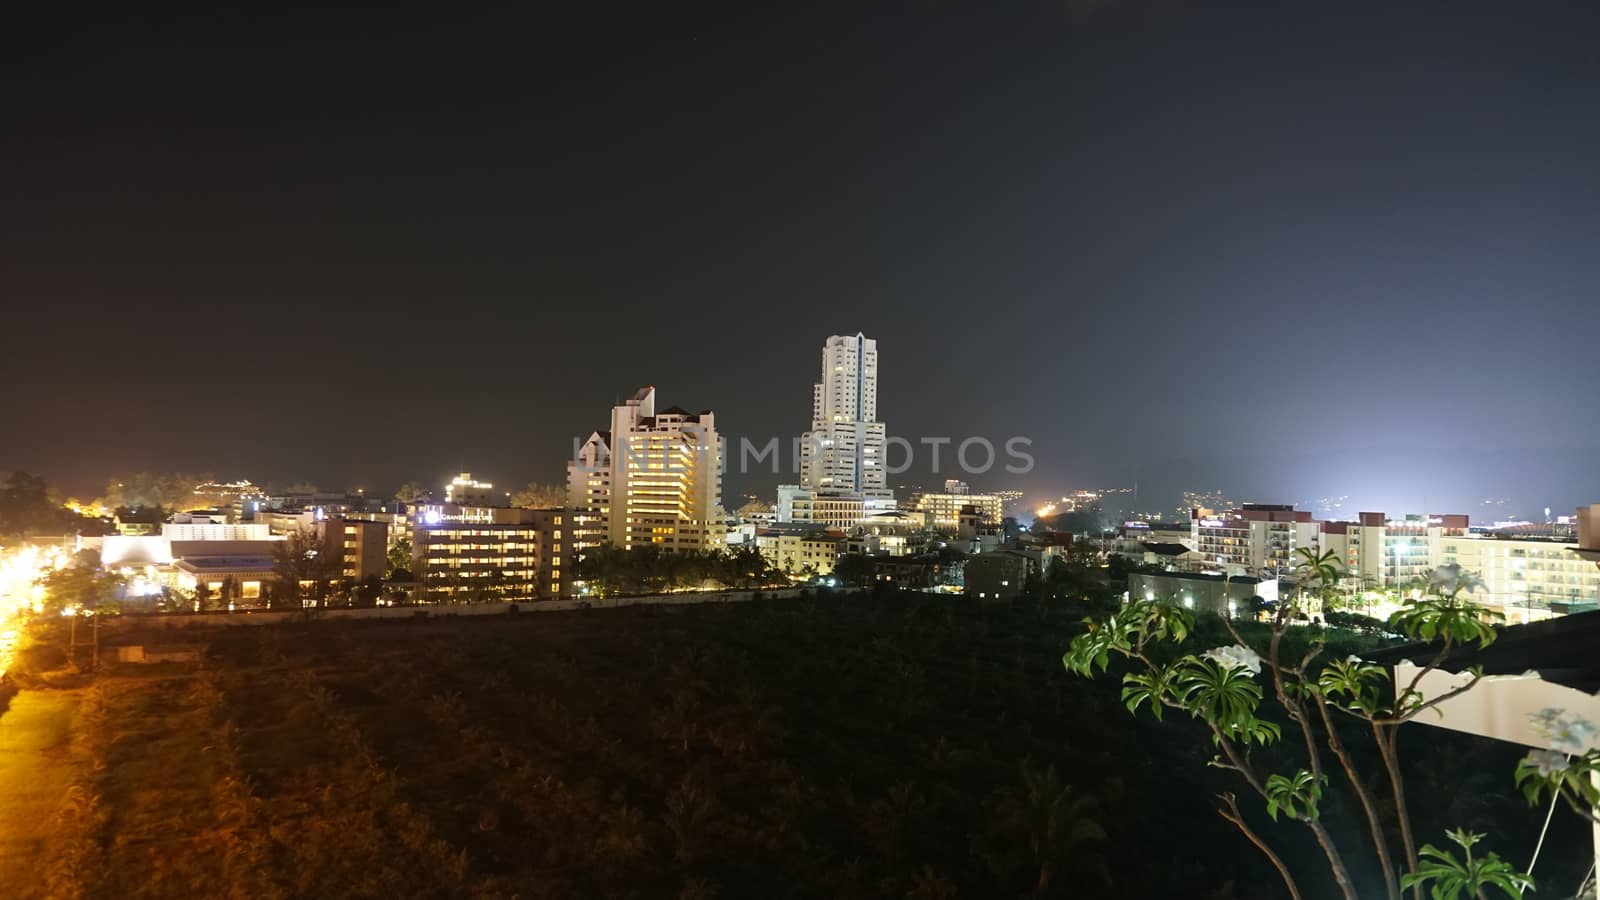 Night city of Patong, Phuket island. Houses of different heights stand on the beach. Street lights are shining brightly. On the road go scooters and cars. Tropical climates, green palm trees.